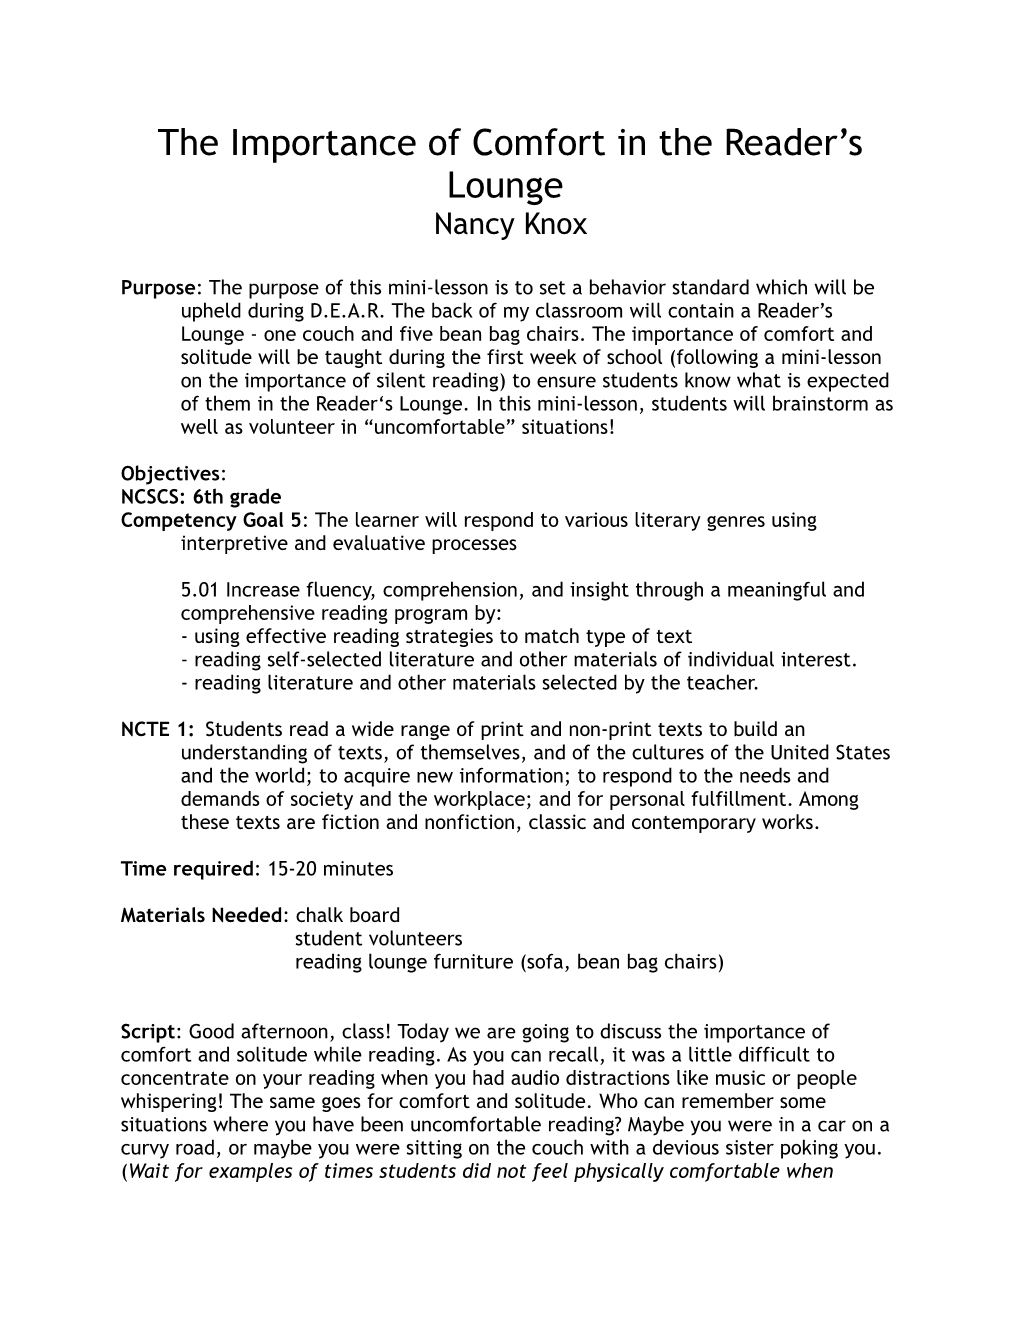 The Importance of Comfort in the Reader S Lounge